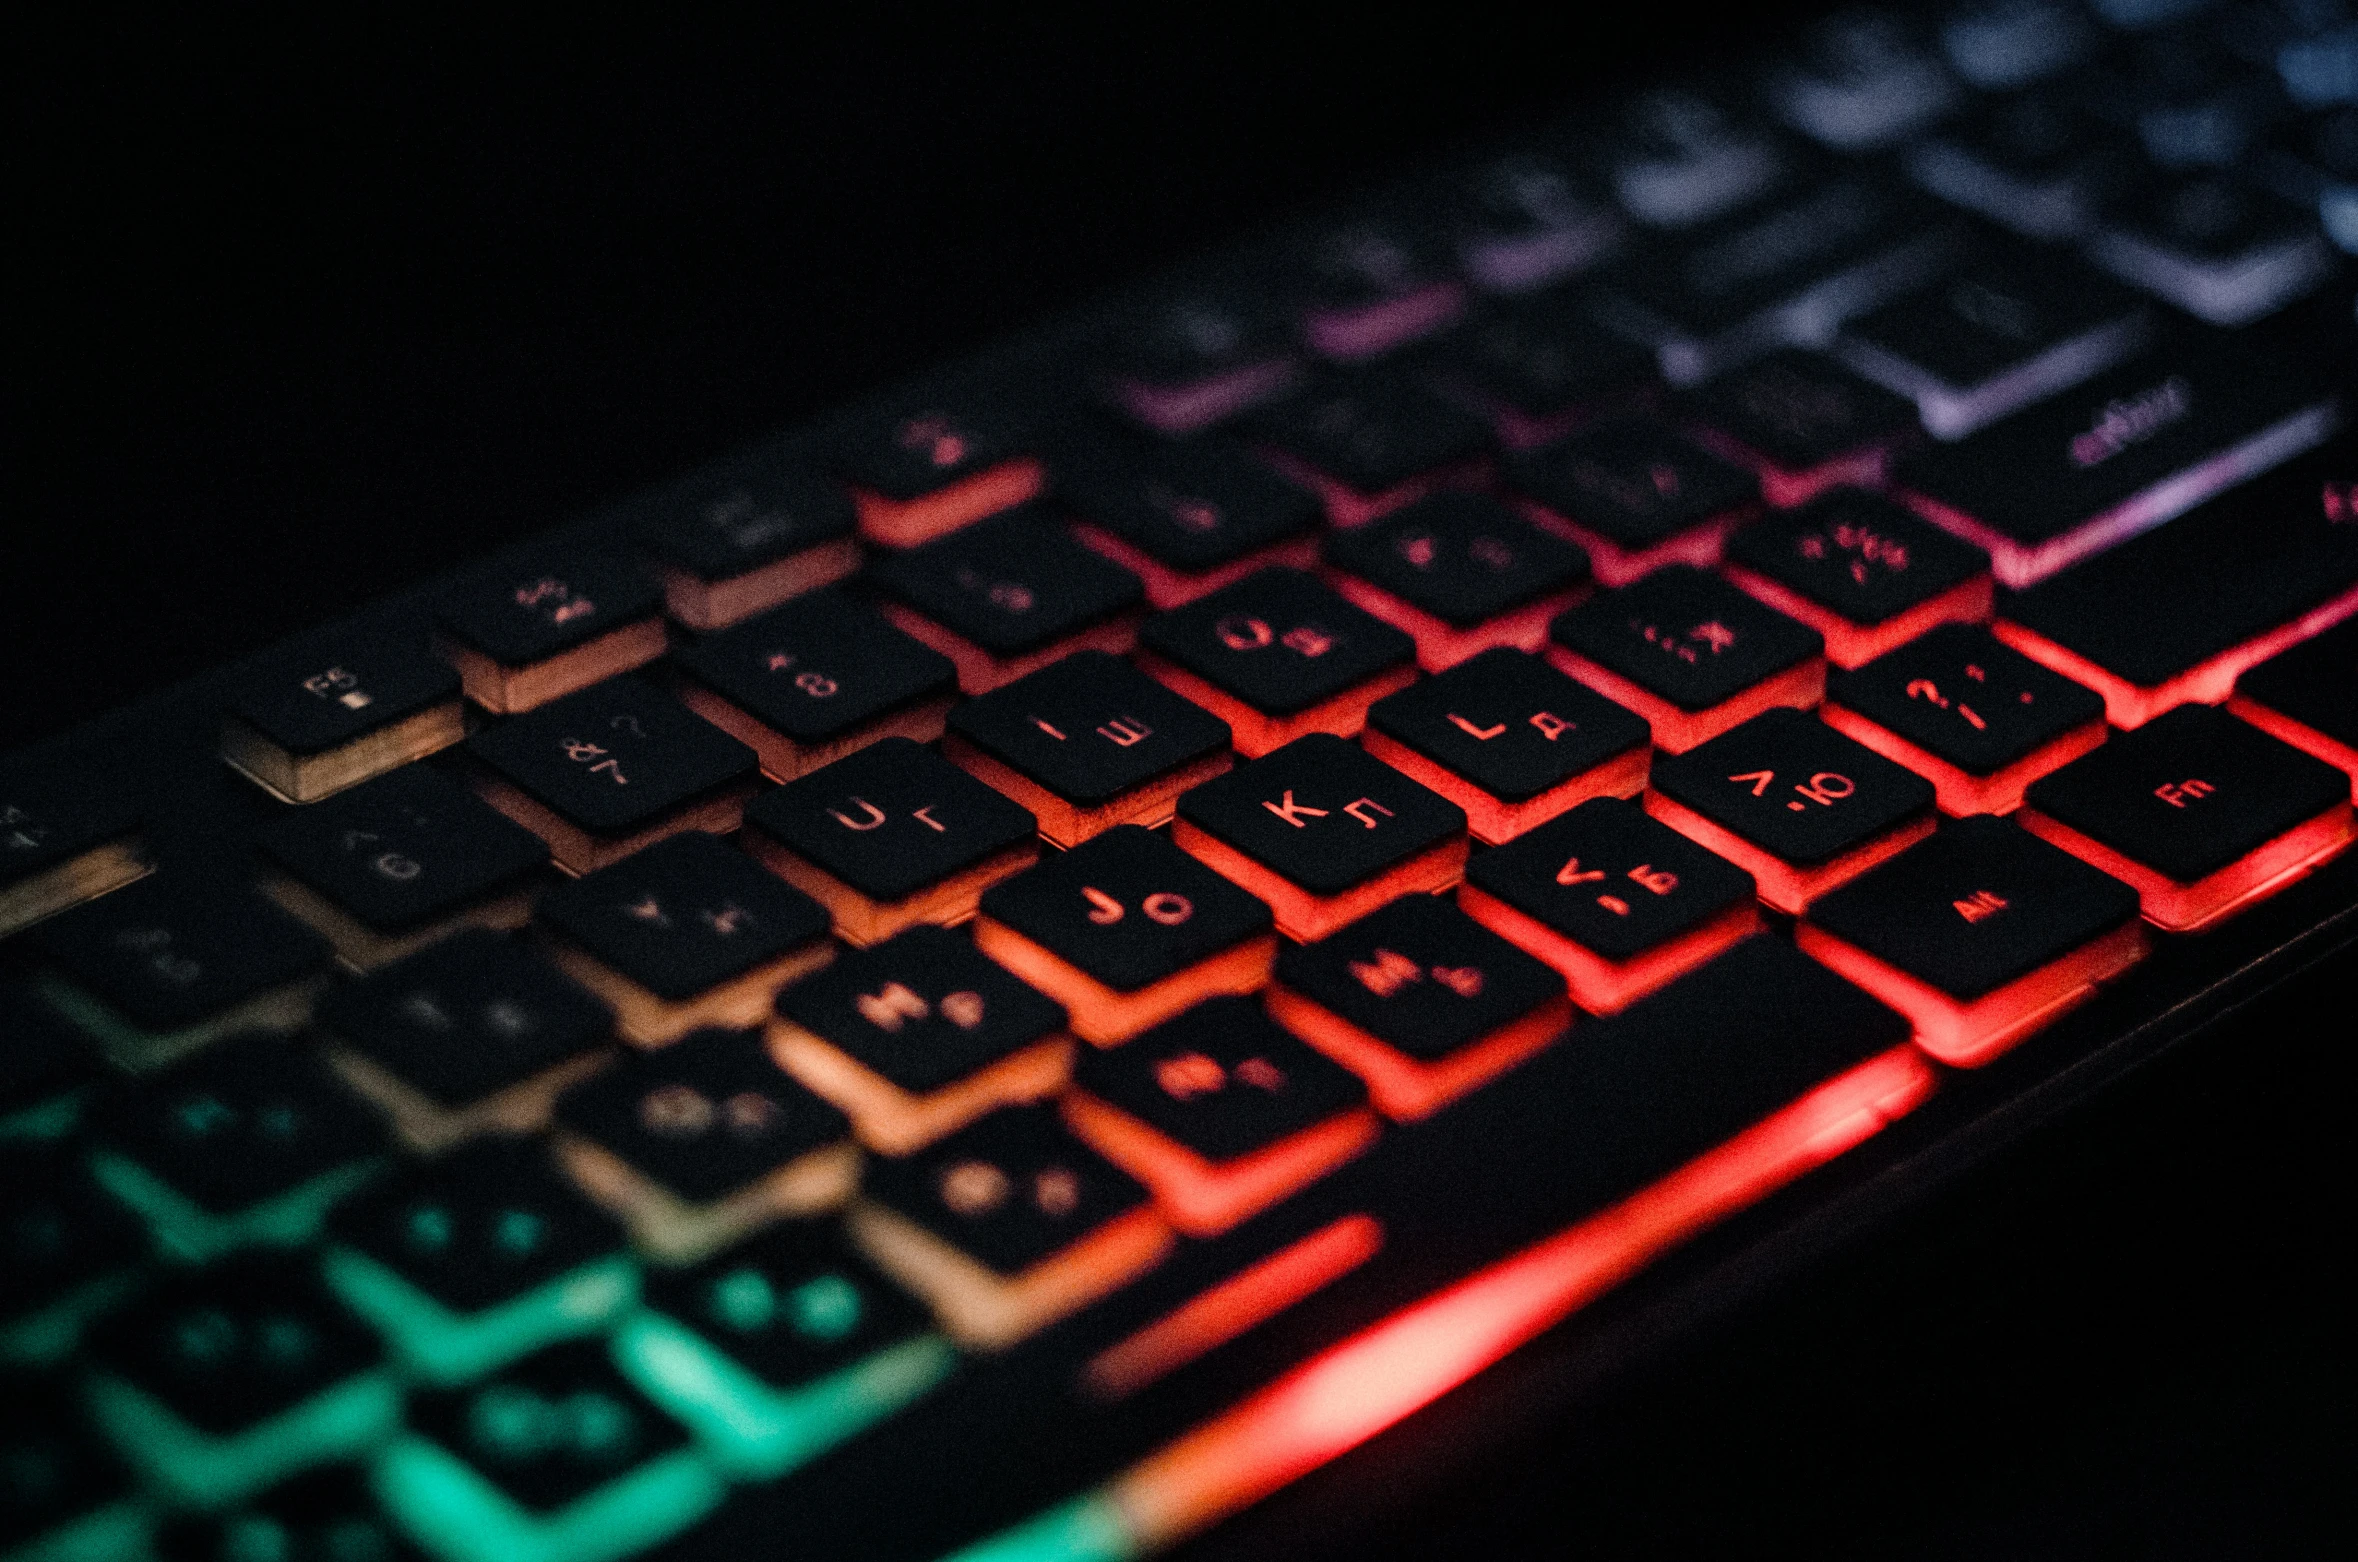 a computer keyboard lit up by the light from a bright red and green light